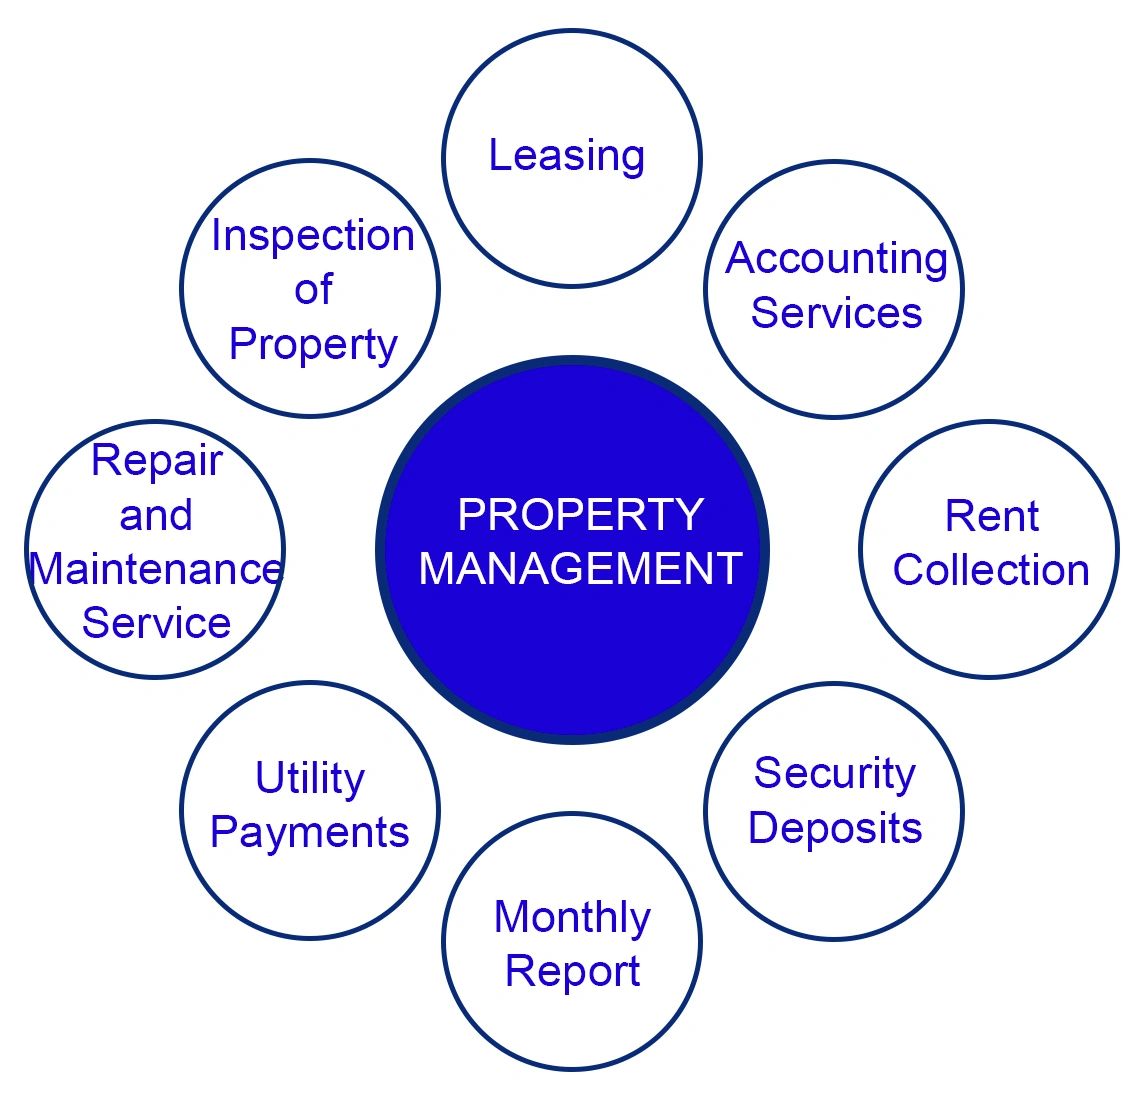 Leasing, Accounting Services, Rent Collection,Security Deposits, Monthly Report, Utility Payments